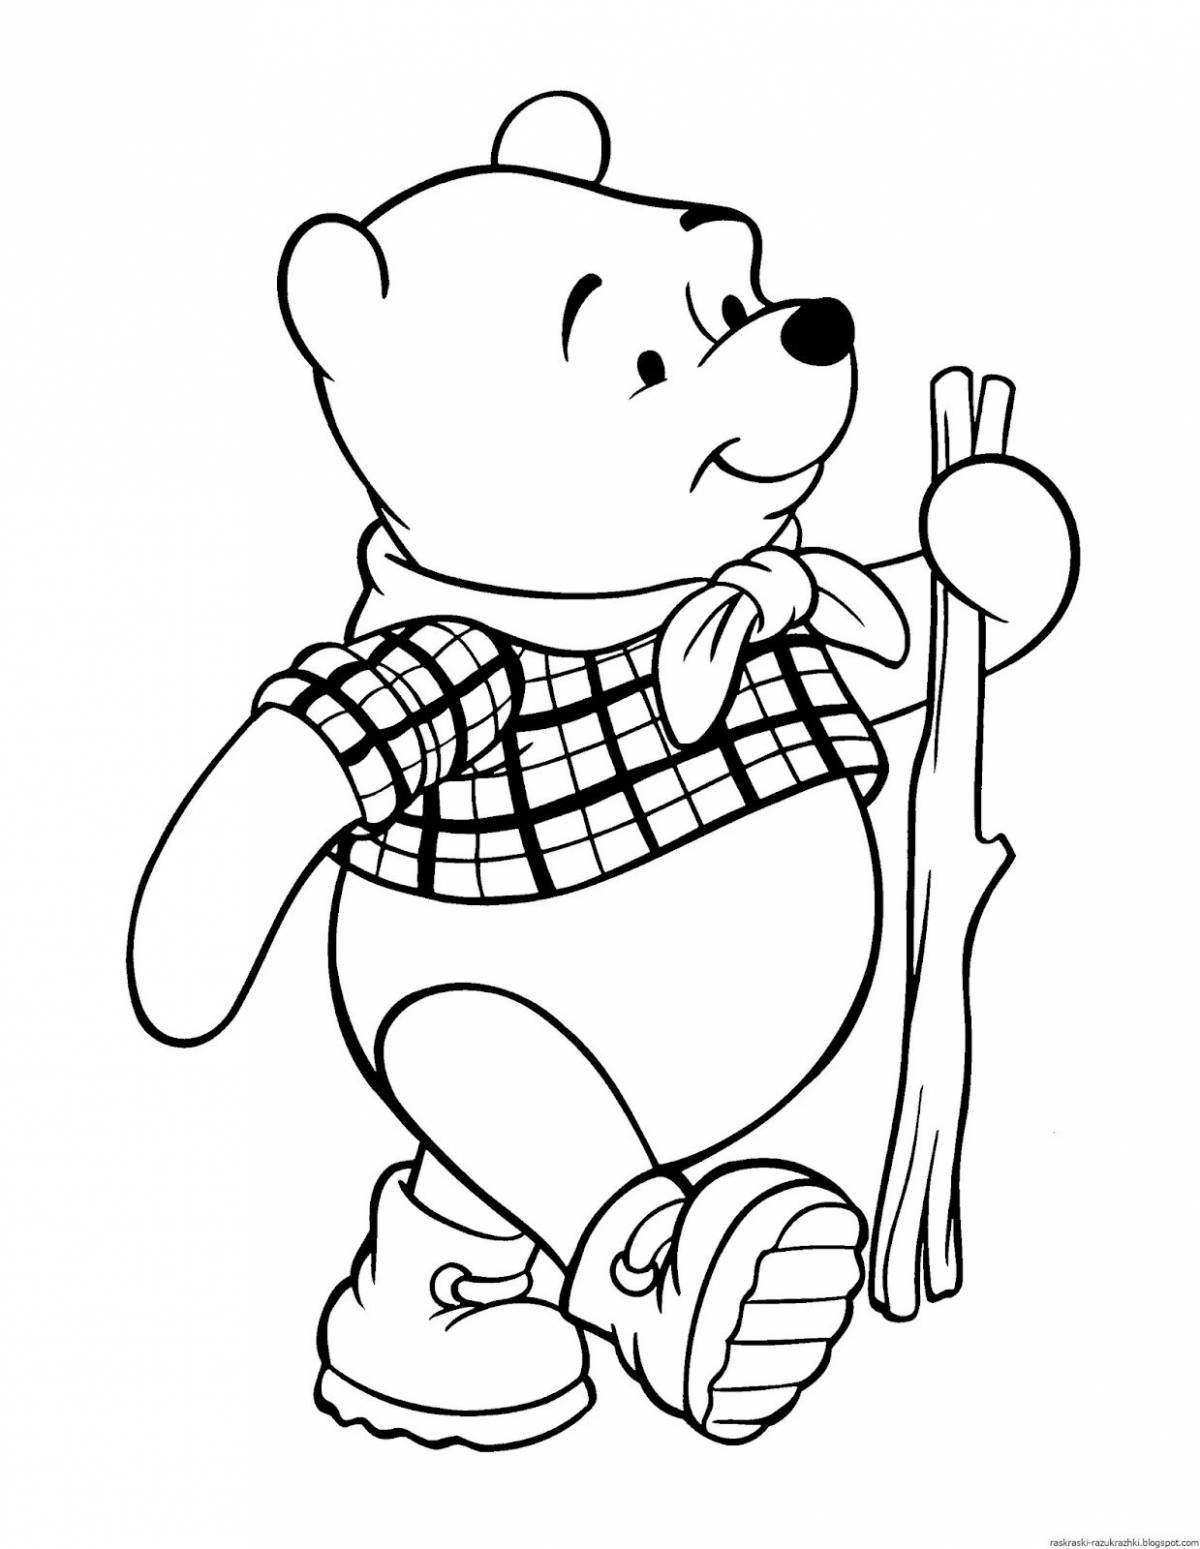 Inspiring winnie the pooh coloring book for kids